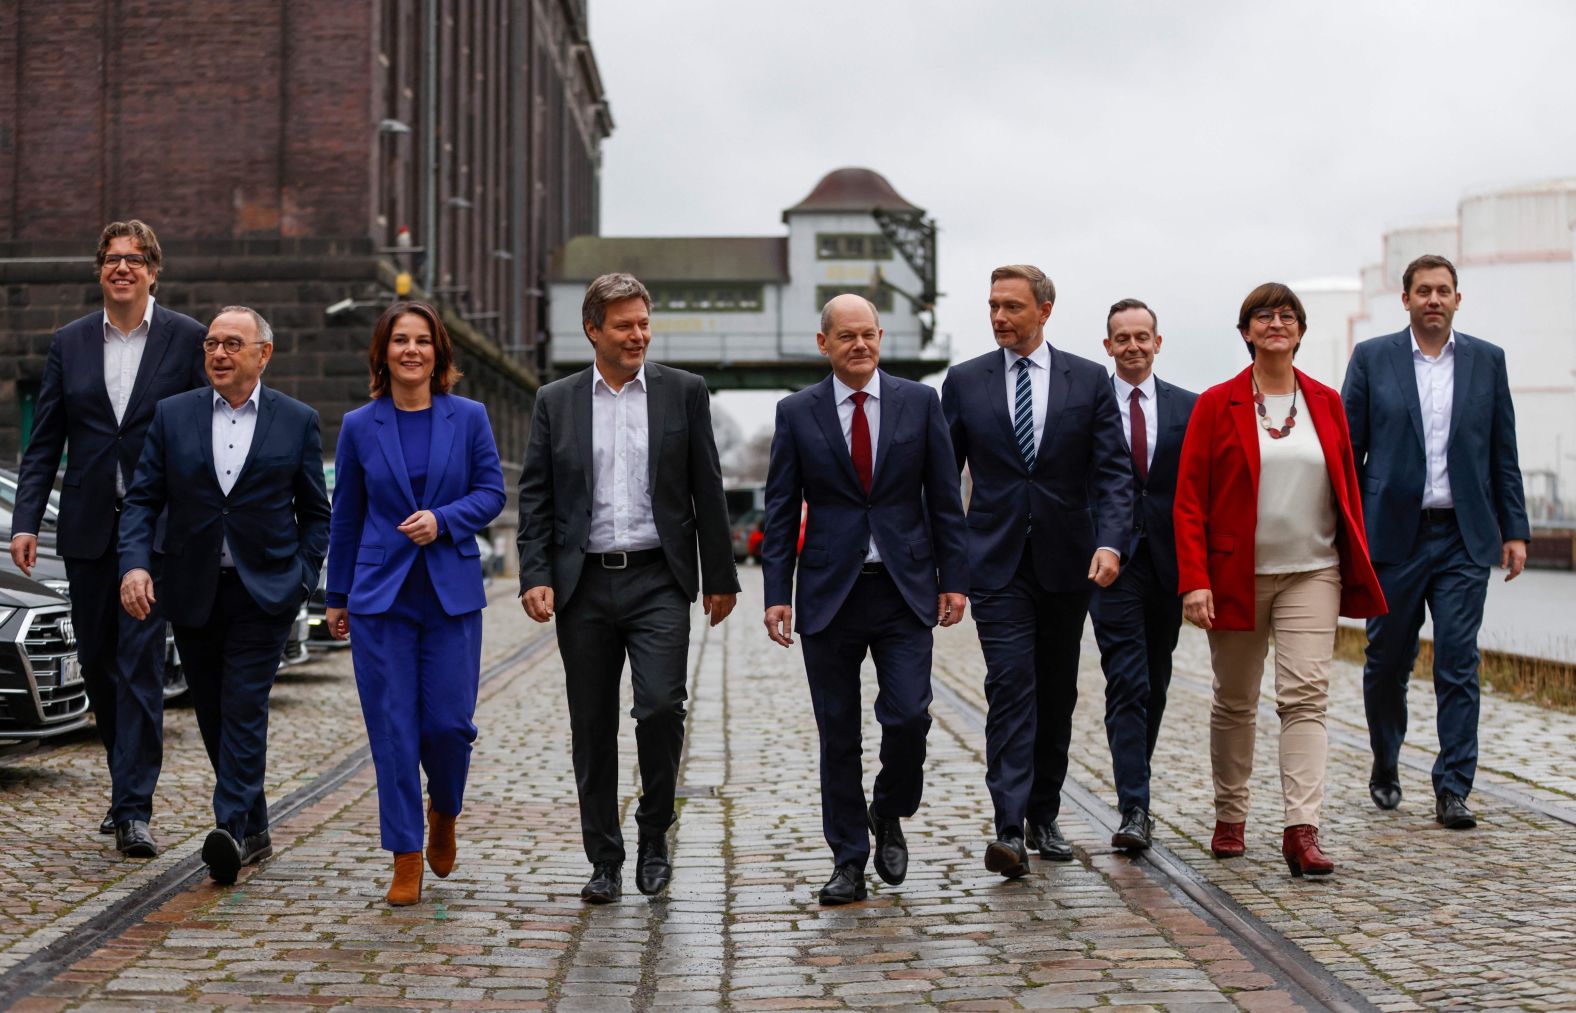 German Vice-Chancellor Olaf Scholz, at center in the red tie, walks with coalition leaders after three political parties <a href="https://www.cnn.com/2021/11/24/europe/germany-coaltion-deal-intl/index.html" target="_blank">sealed a deal for a new government</a> on Wednesday, November 24. <a href="https://www.cnn.com/2021/09/27/europe/olaf-scholz-profile-spd-germany-election-intl/index.html" target="_blank">Scholz</a> has been proposed as the next chancellor to replace outgoing leader <a href="http://www.cnn.com/2013/09/19/europe/gallery/angela-merkel-career/index.html" target="_blank">Angela Merkel.</a>